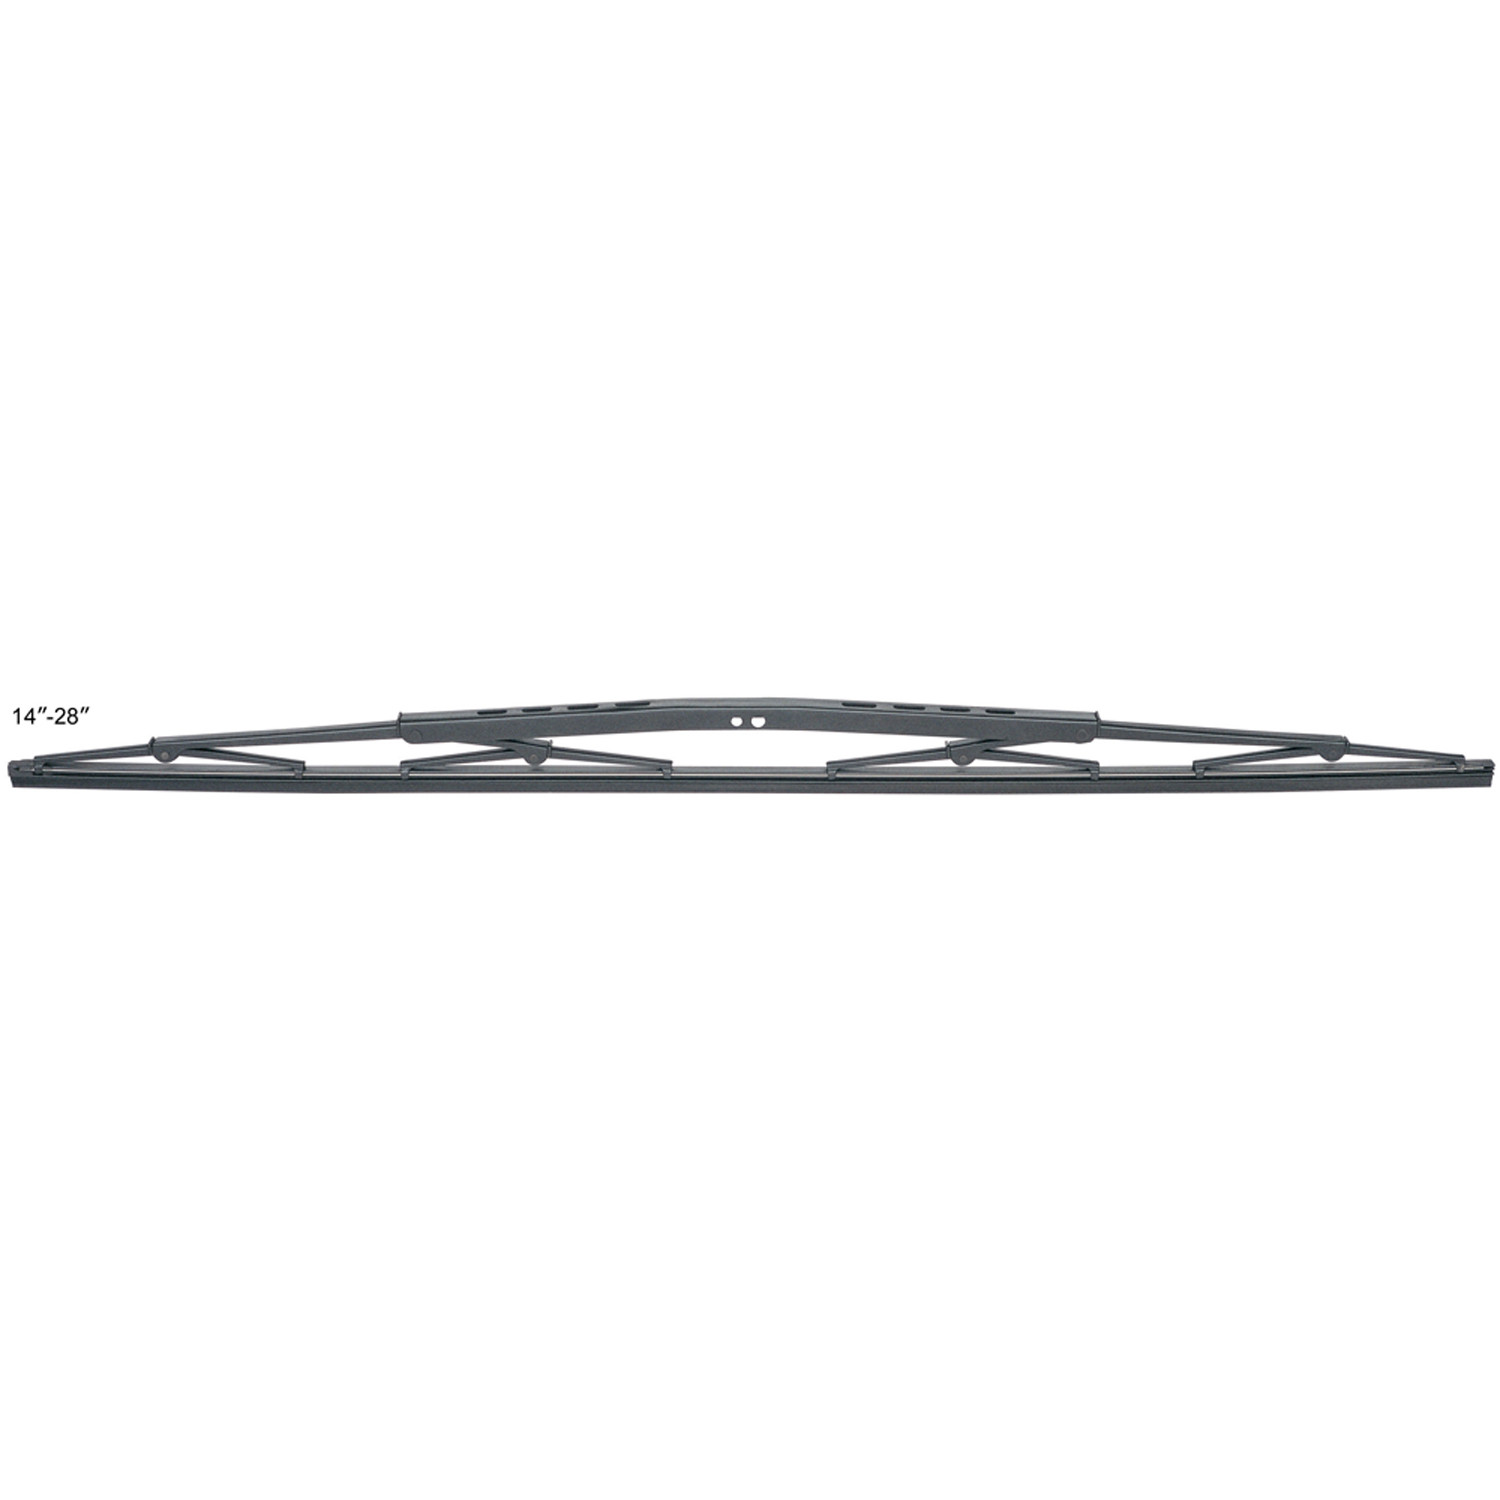 Truck wiper blade factory sale high quality